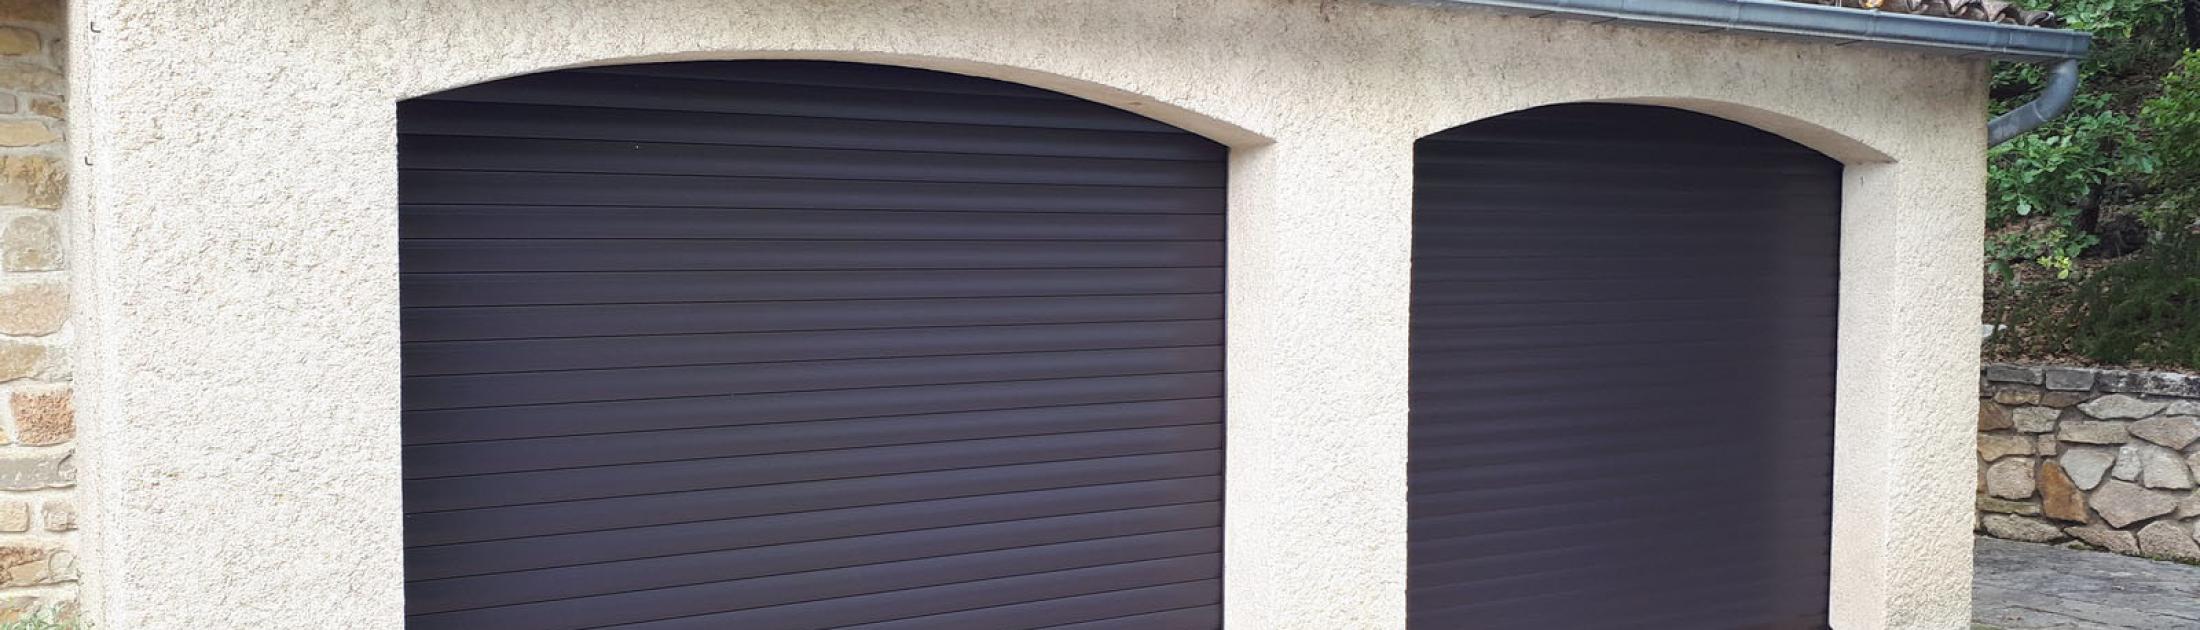 PORTE GARAGE ENROULABLE RAL 7016 - CRUVIERS LASCOURS